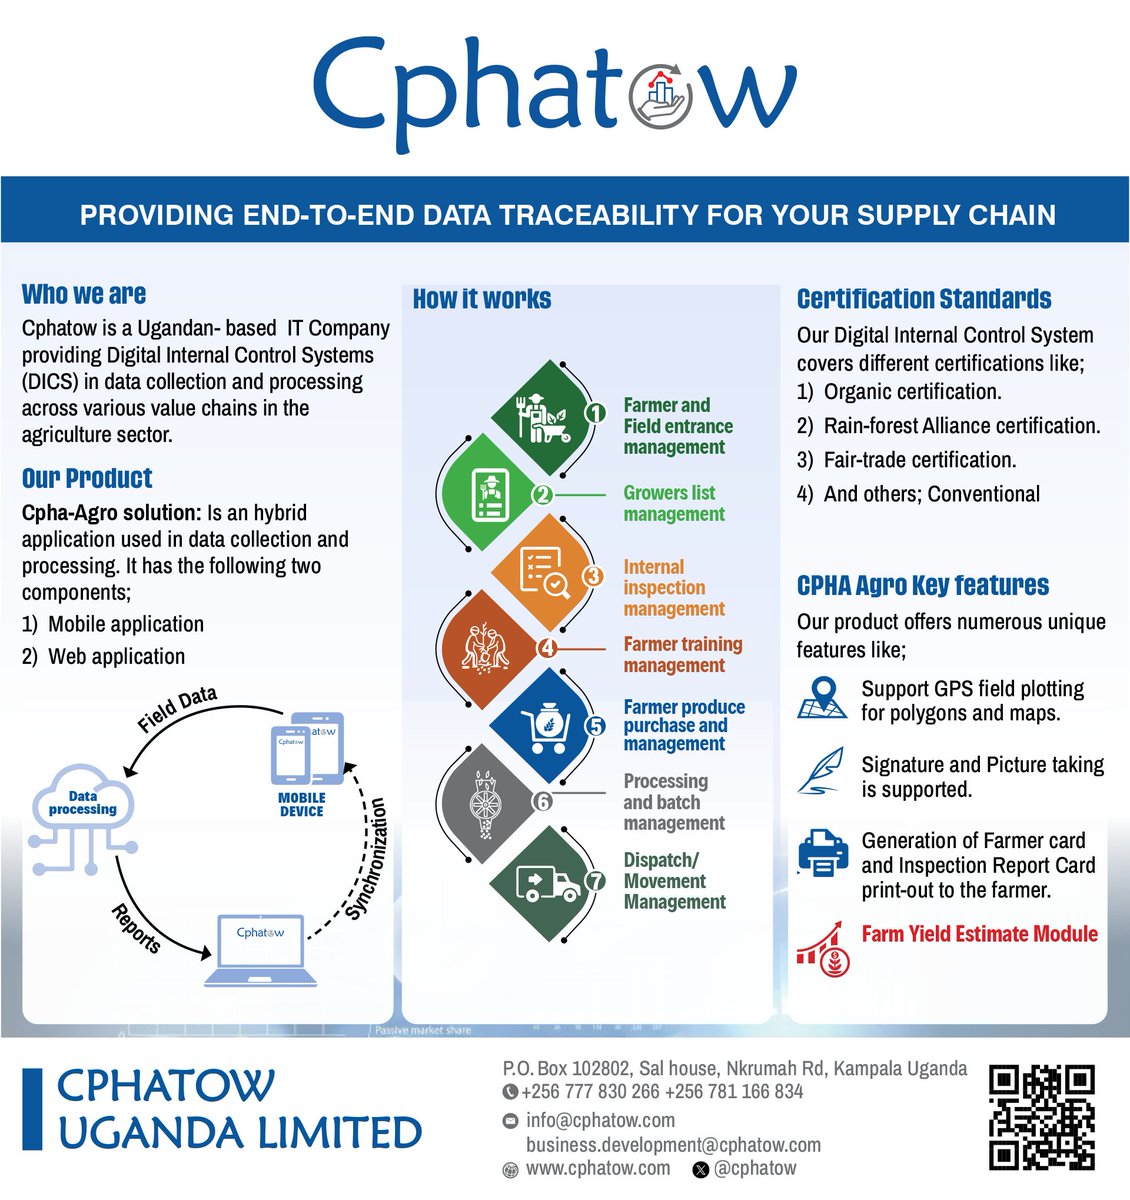 Here to digitise your supply chian to create traceability